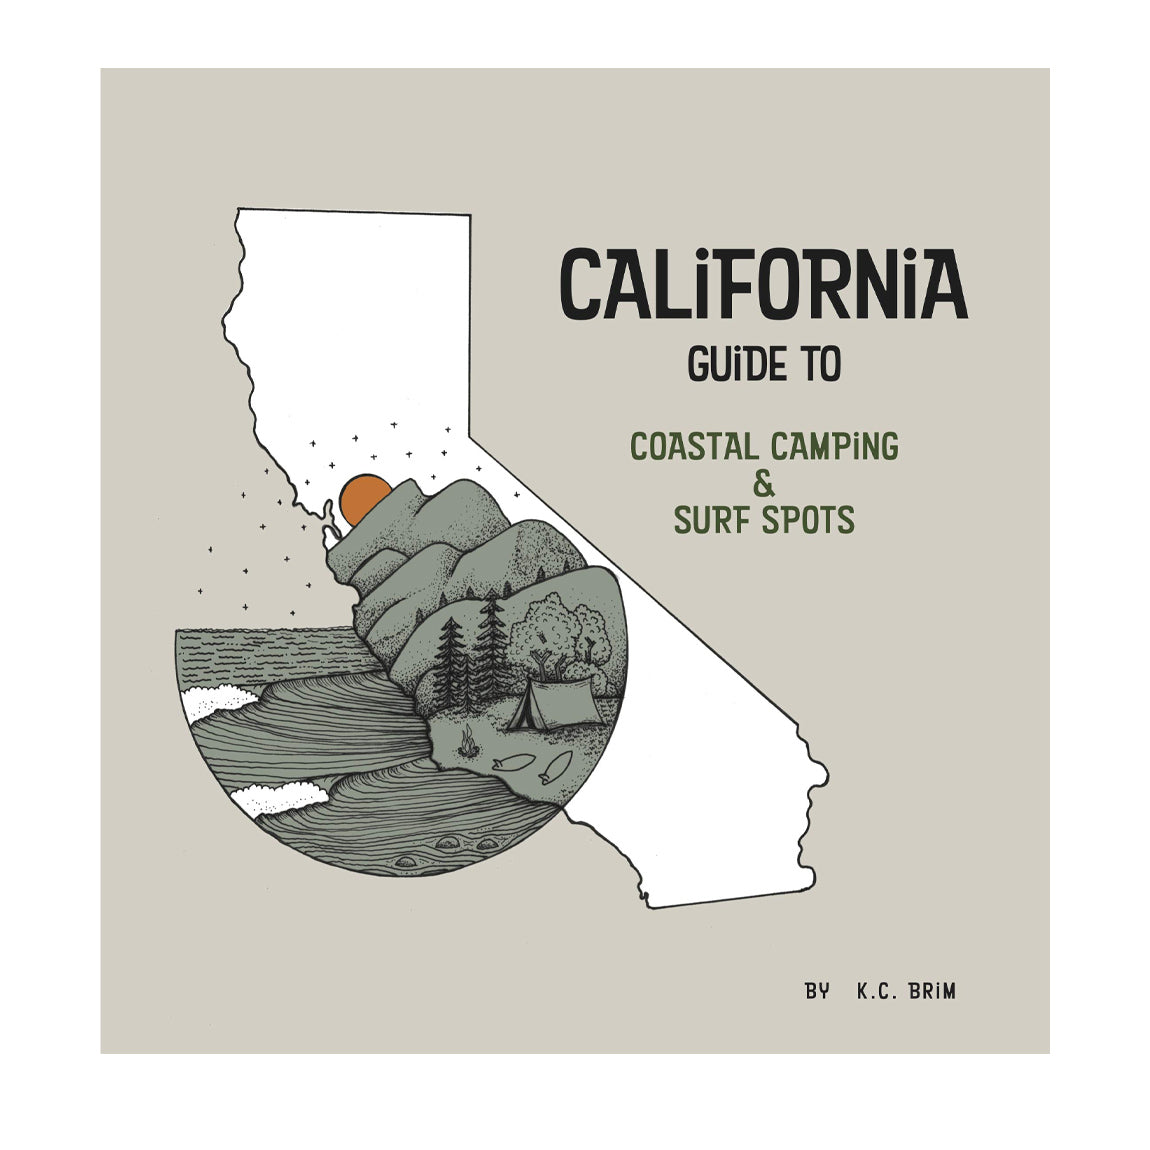 CALIFORNIA GUIDE TO COASTAL CAMPING AND SURF SPOTS